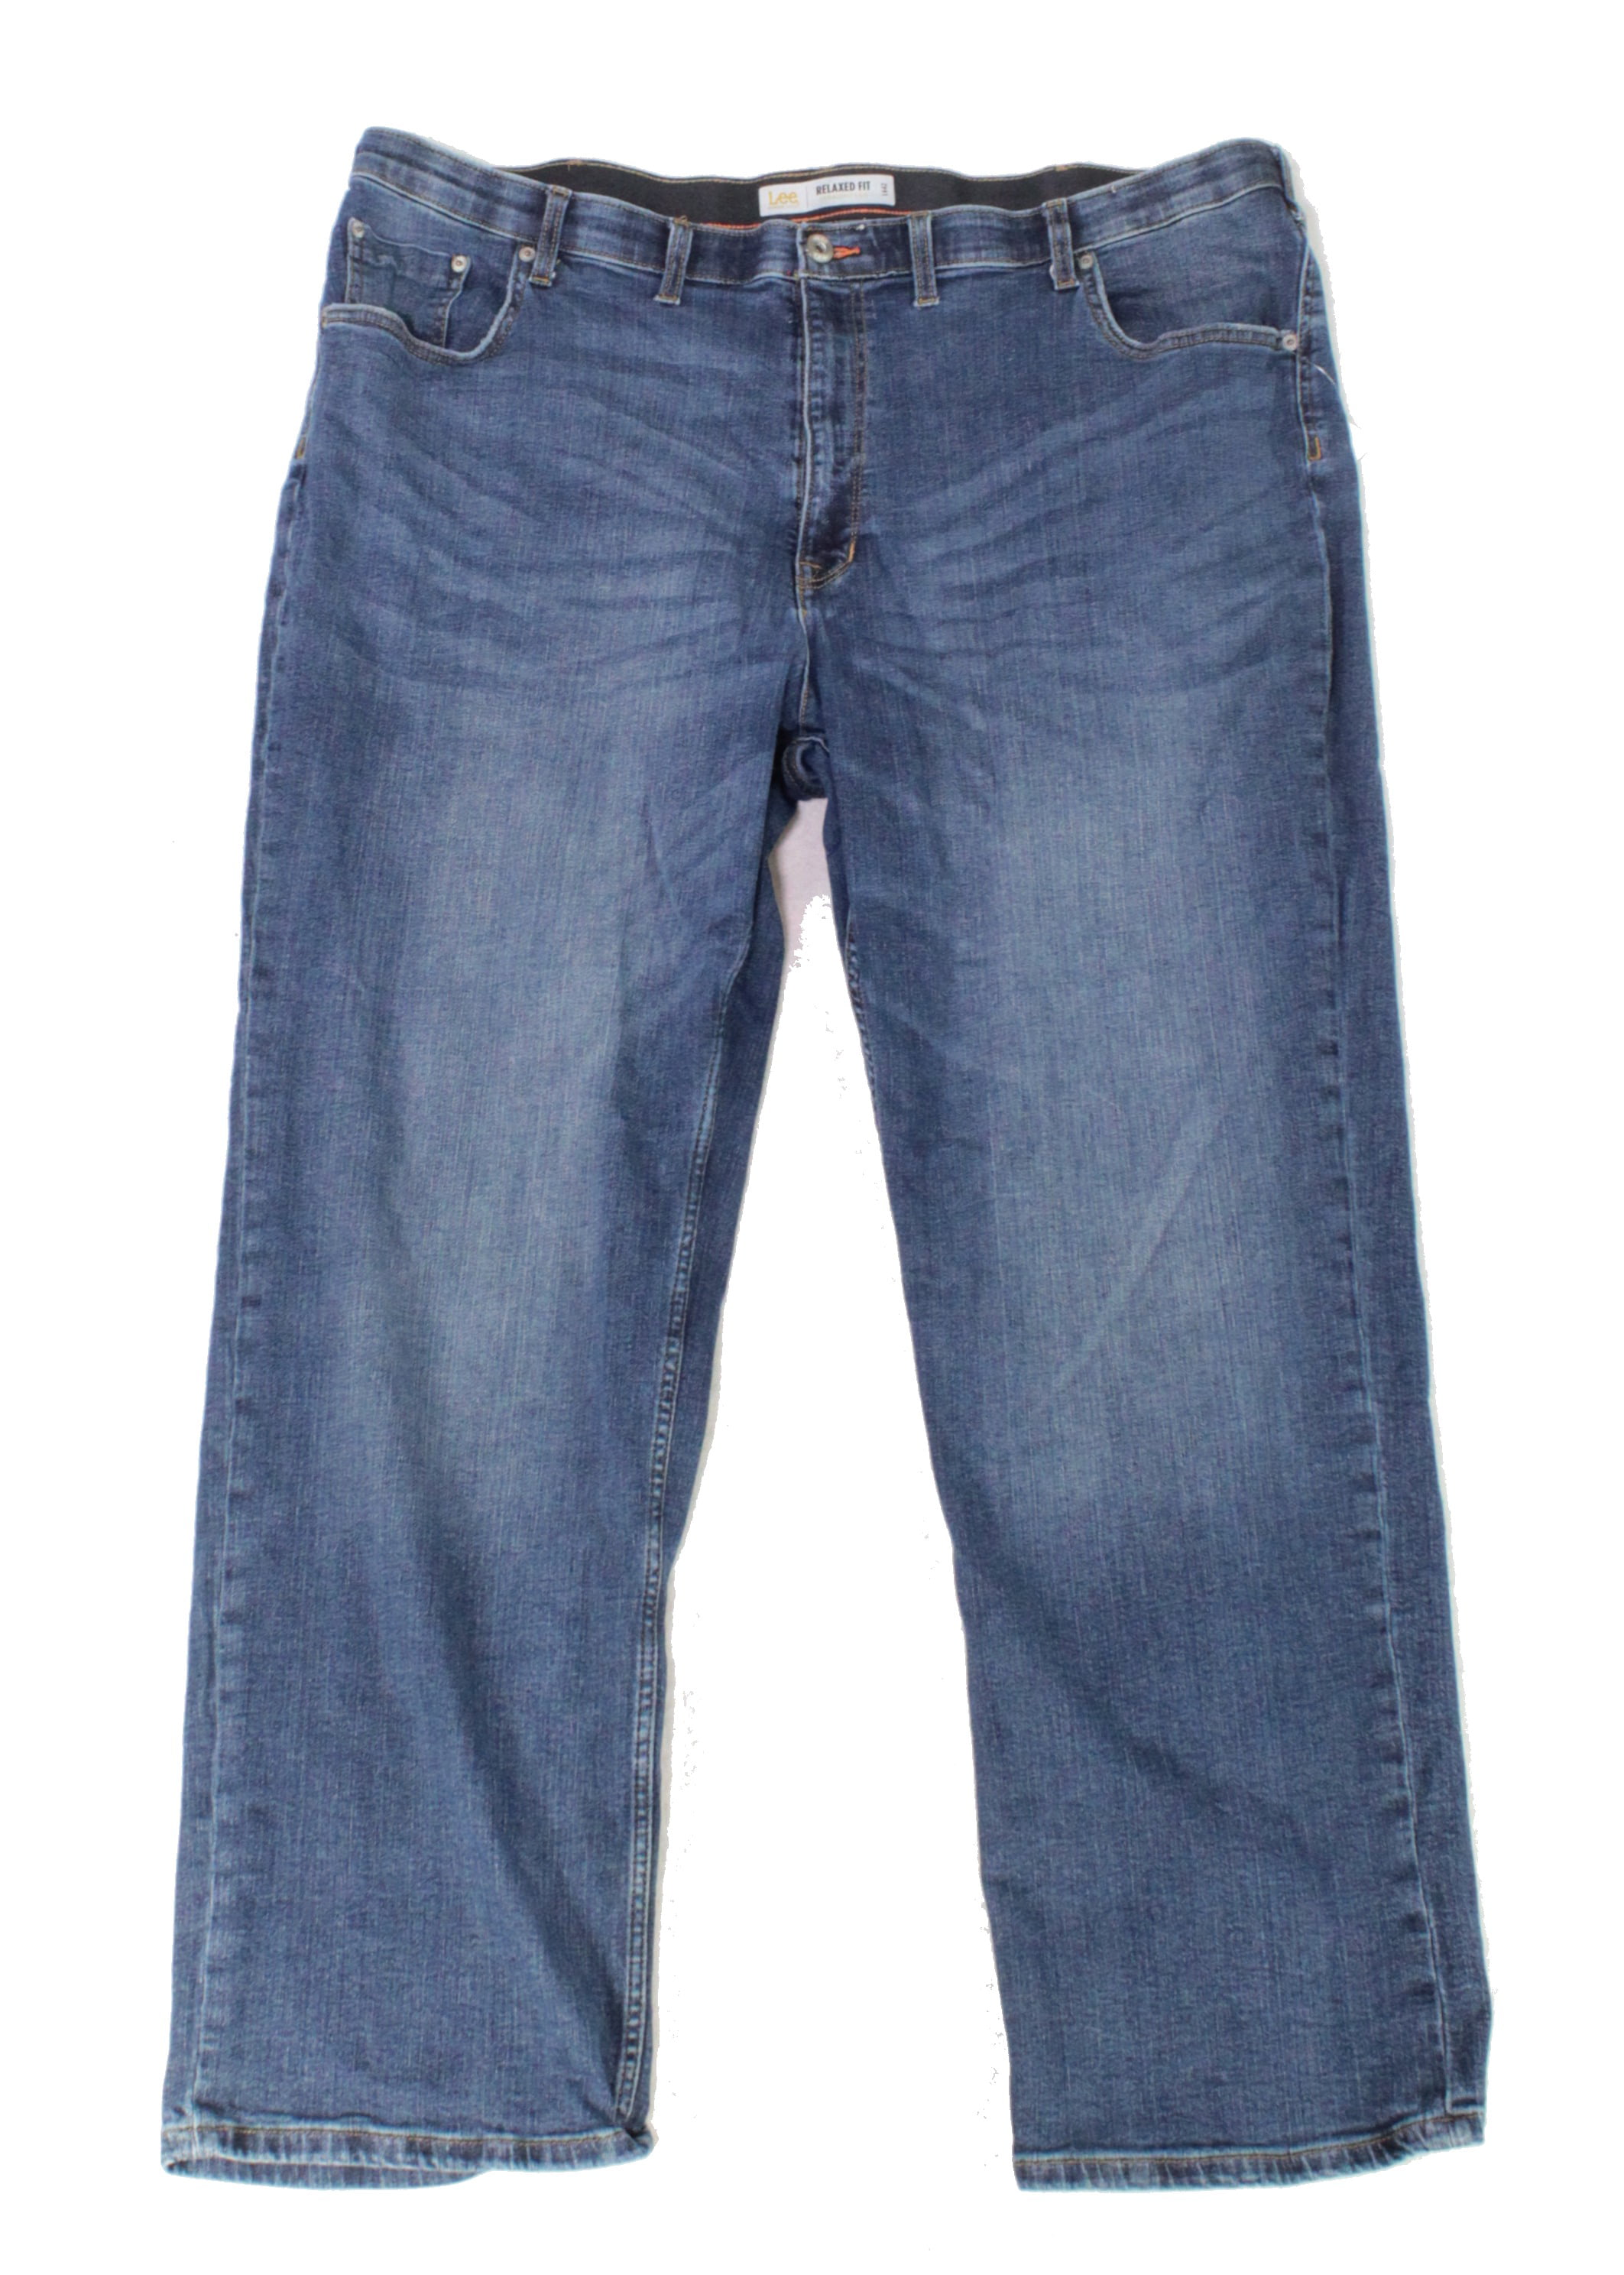 Jeans for Men Relaxed Fit,Big and Tall Blue Stretch Straight Leg Loose Fit Denim Jeans Plus Size